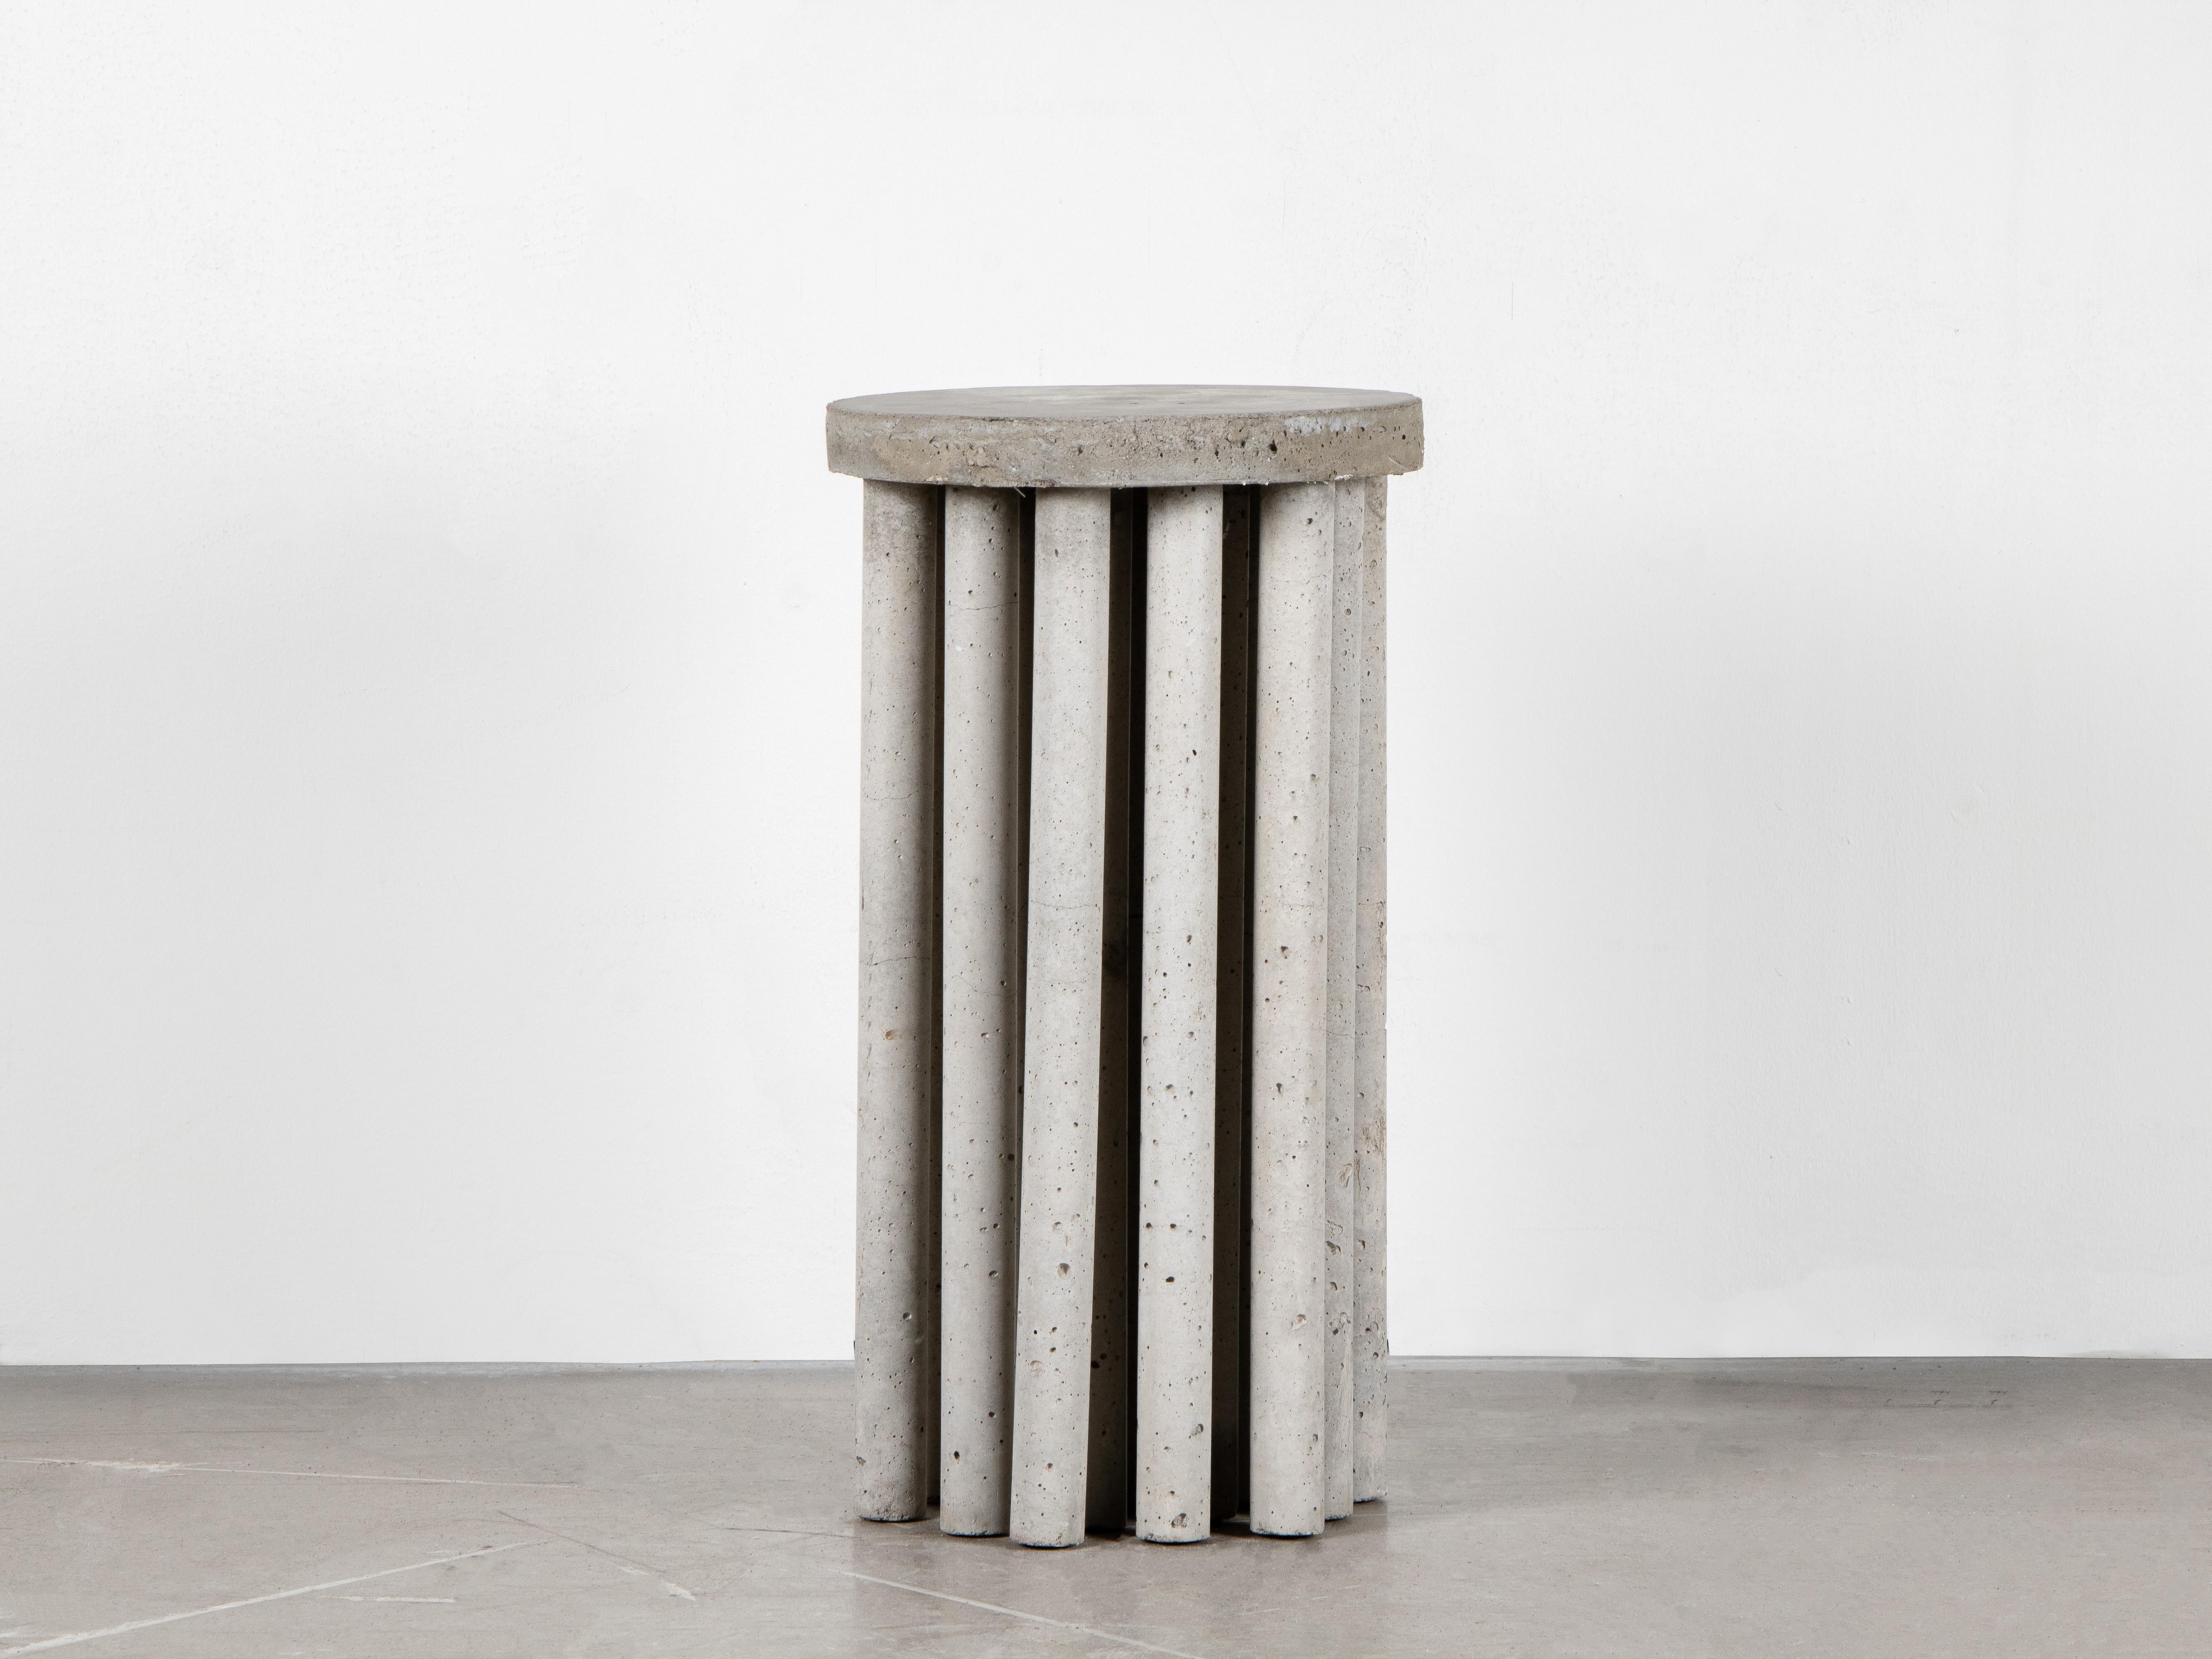 Contemporary grey side table in concrete - Pale Plinth by Lucas Morten

2021
Limited edition of 23 + 1 AP
Dimensions (cm): 30 H 56
Material: sculpted in raw concrete

With elements fetched by the architectural era brutalism combined with a